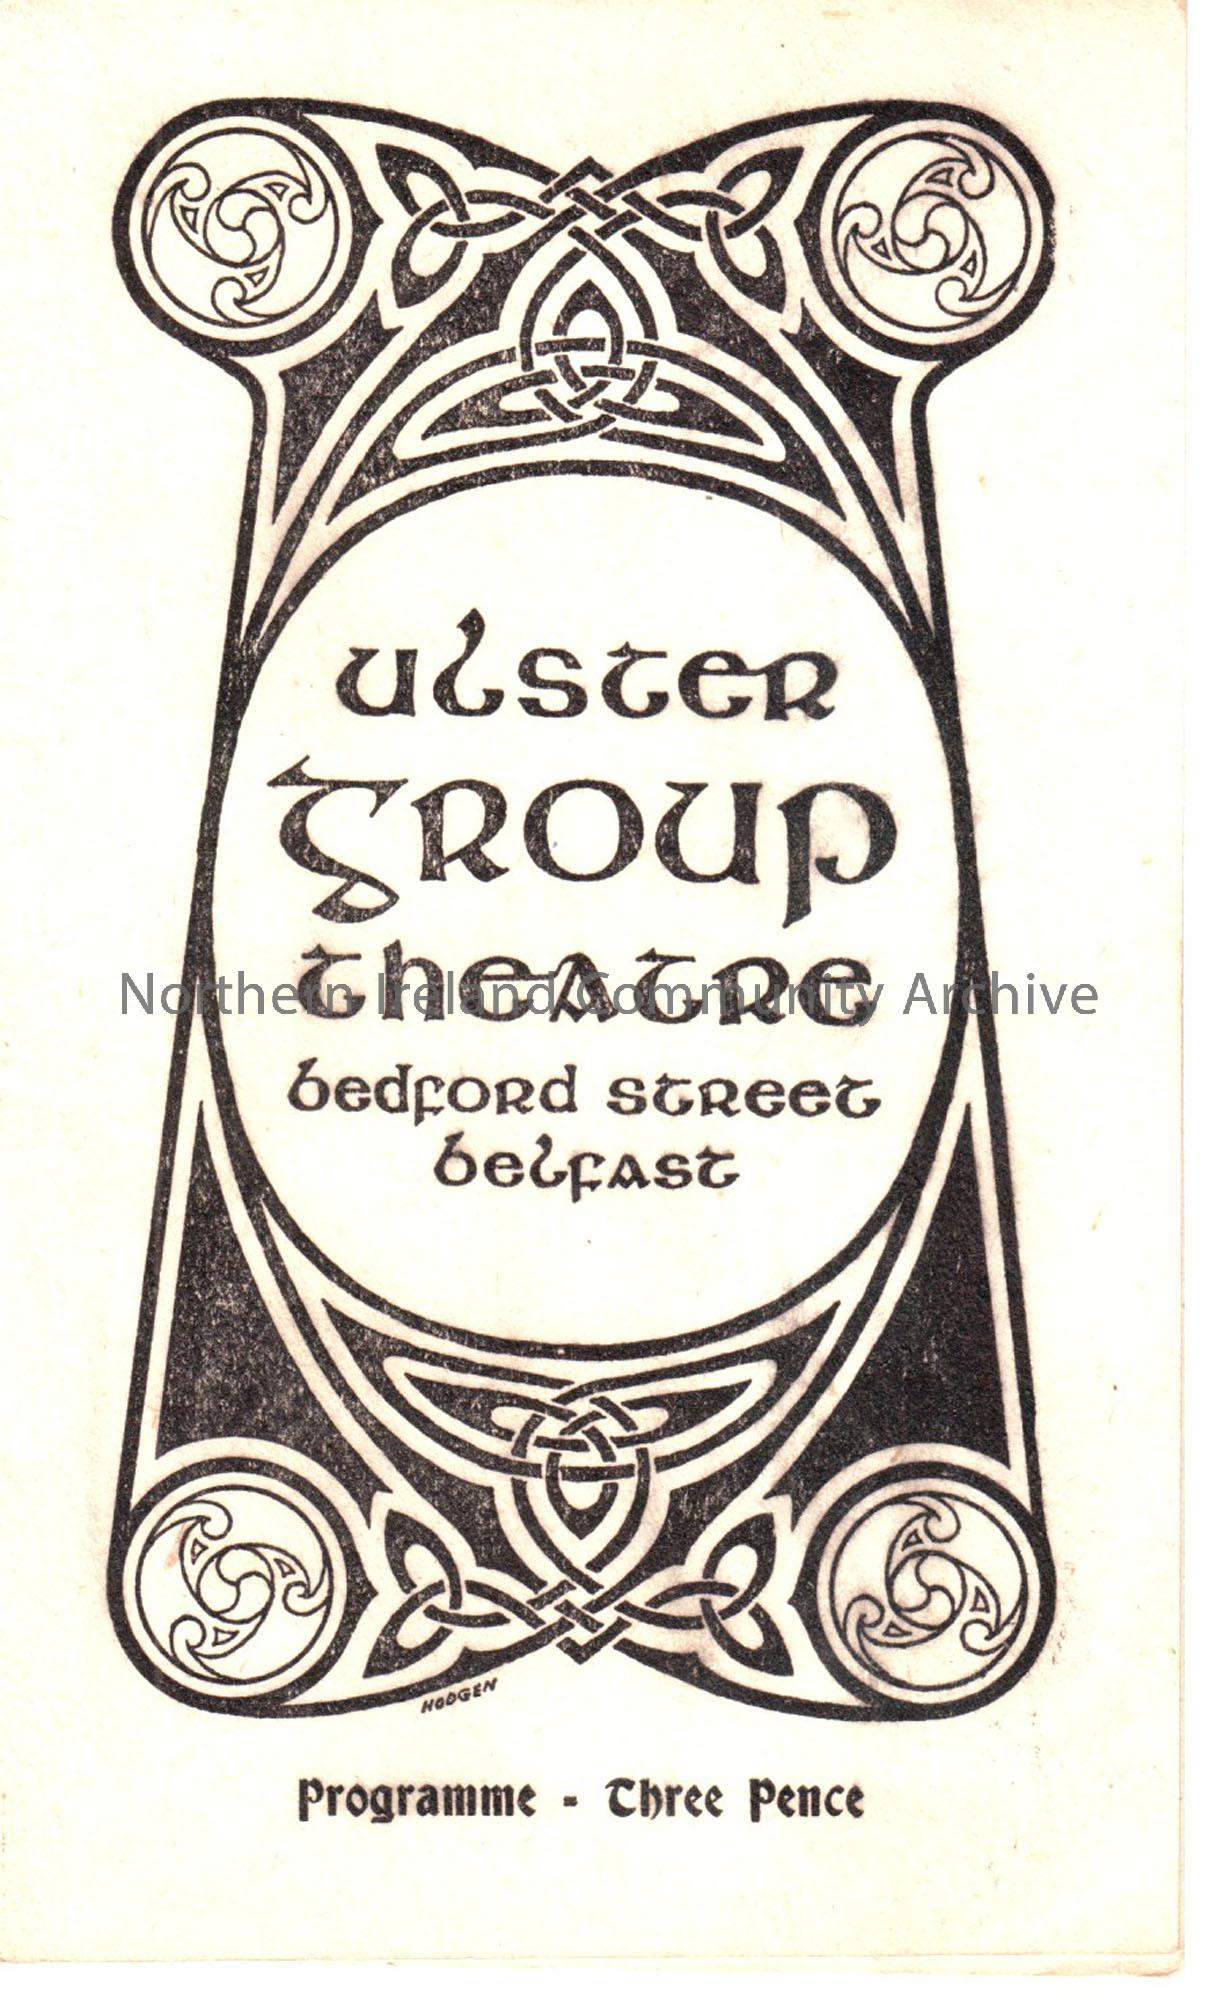 Ulster Group Theatre Bedford Street Belfast programme for ‘The Old Broom’ by George Shiels. Price three pence.